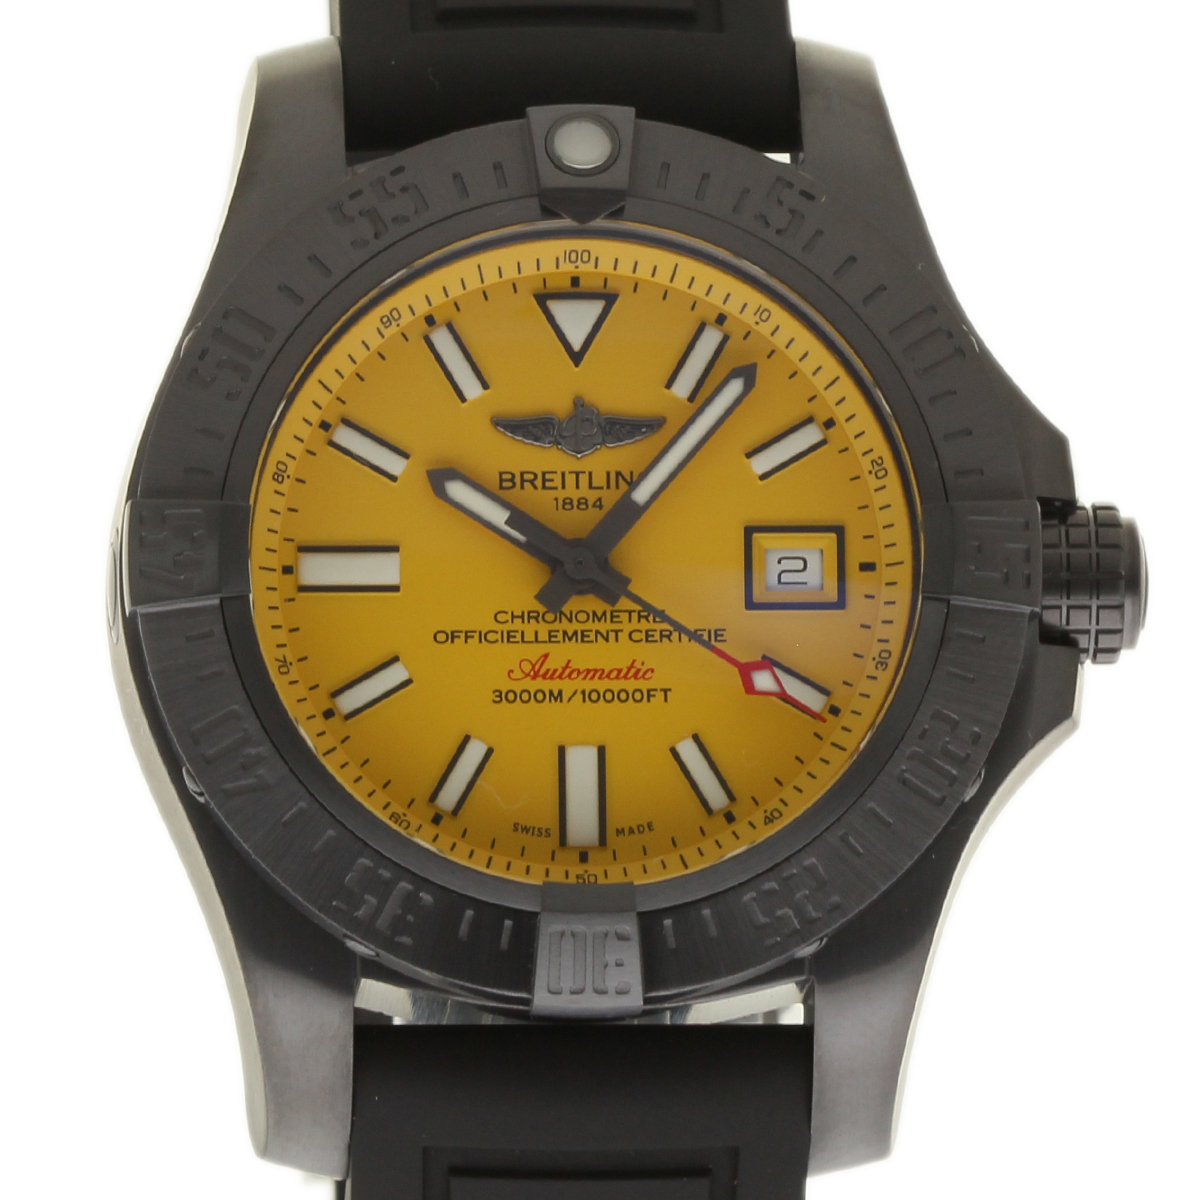 Avenger II Seawolf  in Black Steel on Black Rubber Strap with Cobra Yellow Dial